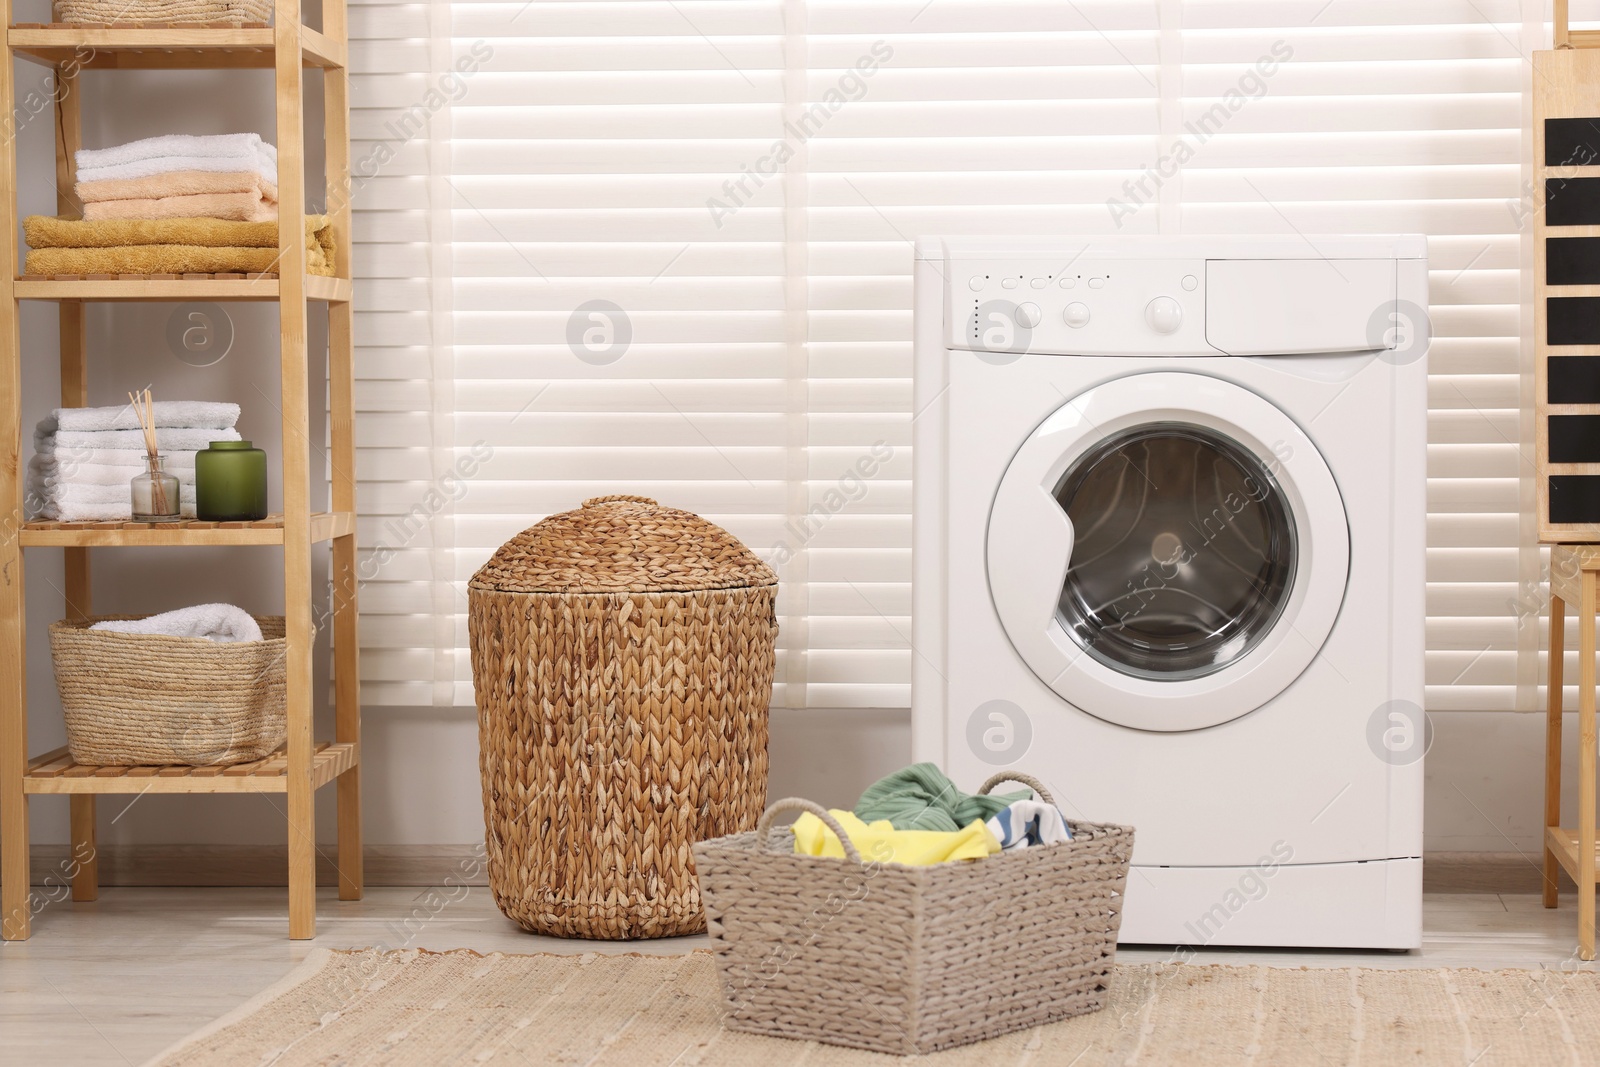 Photo of Laundry room interior with washing machine and baskets